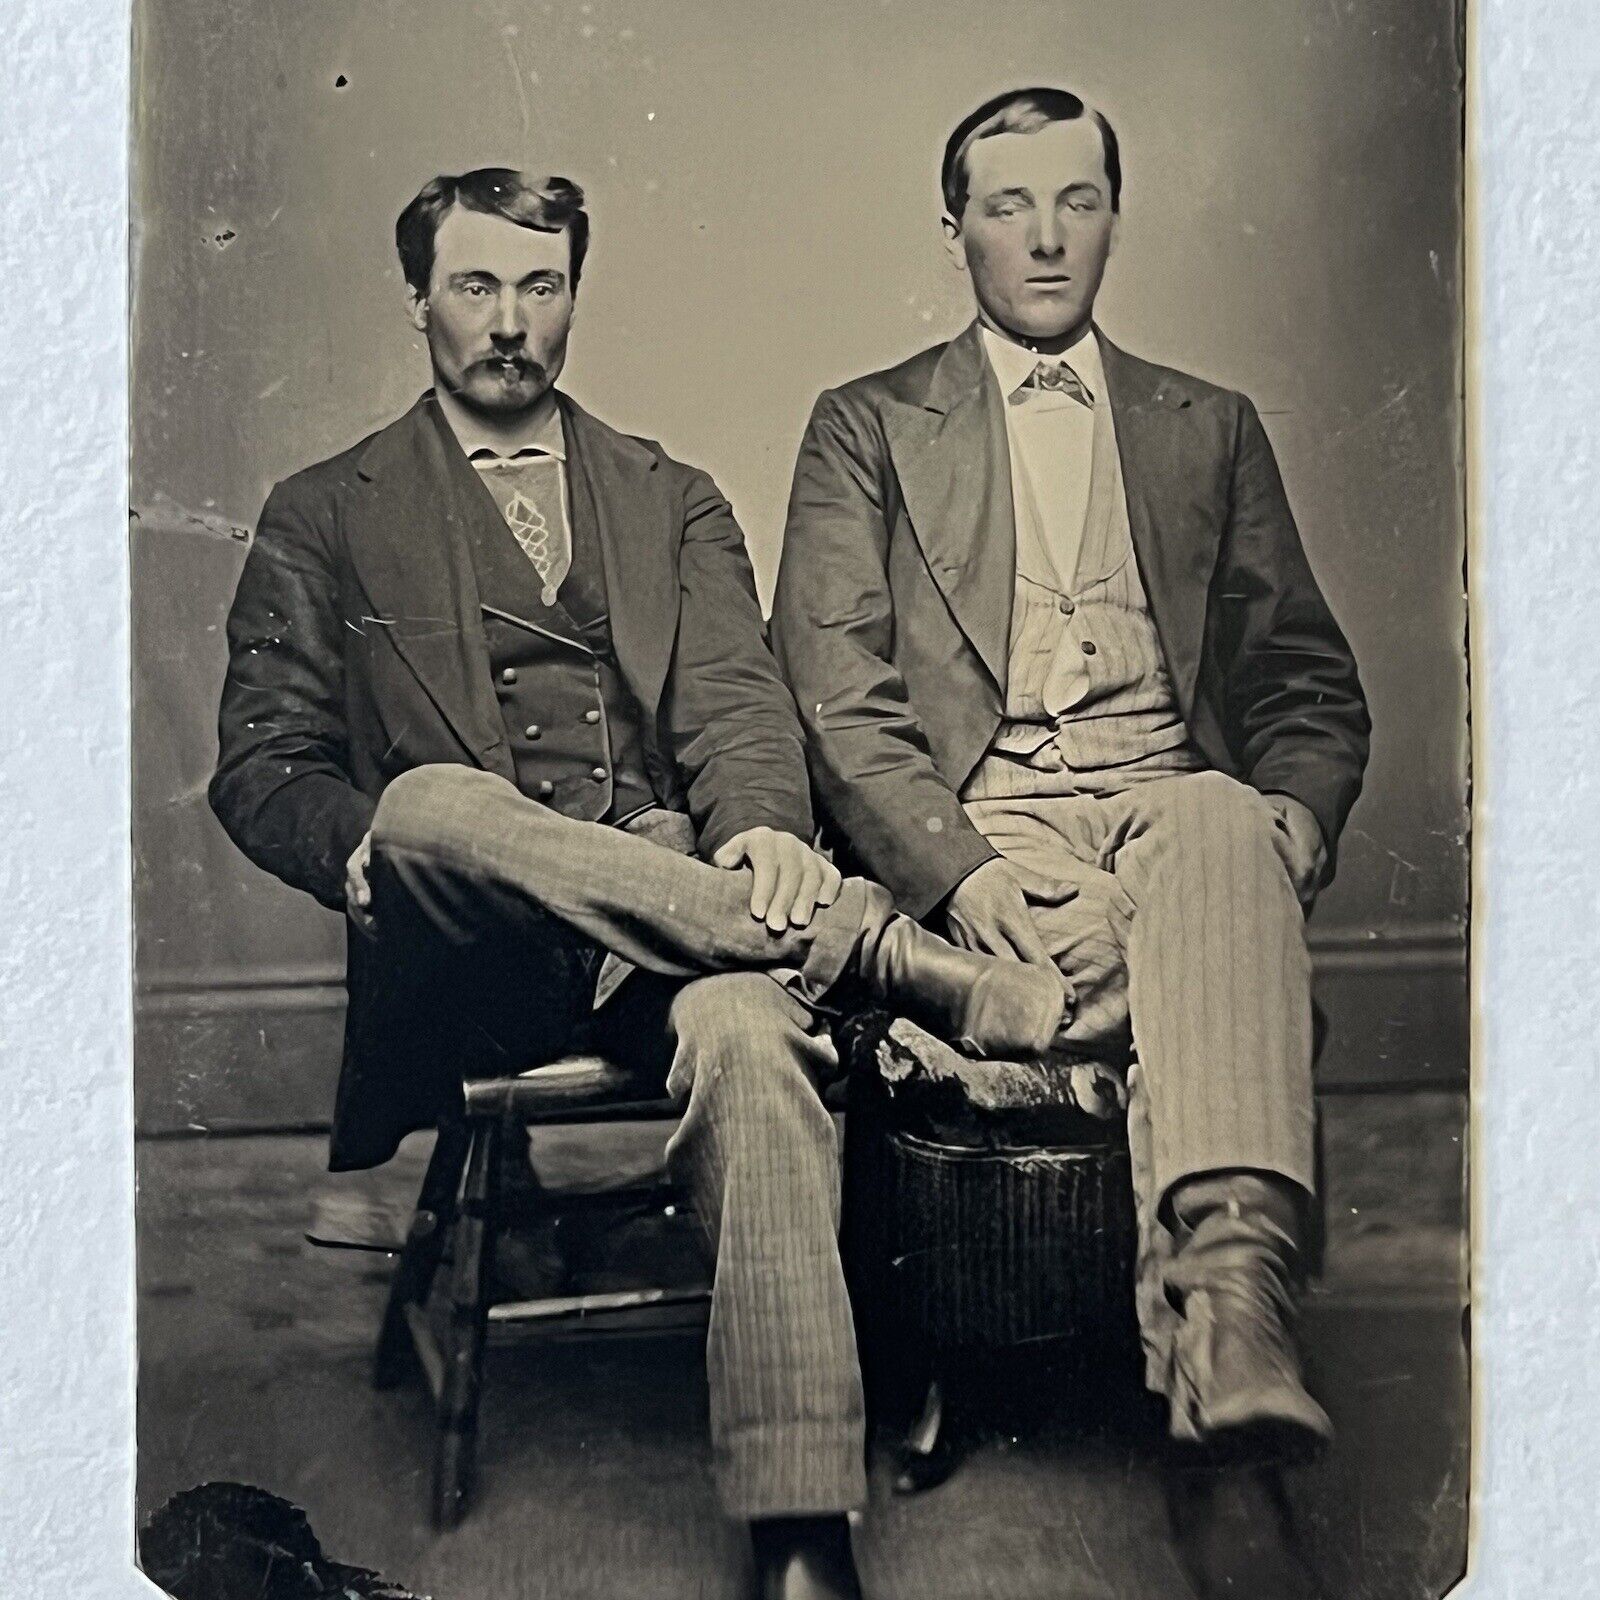 Antique Tintype Photograph Handsome Men One With Amputated Leg War Farm Injury?